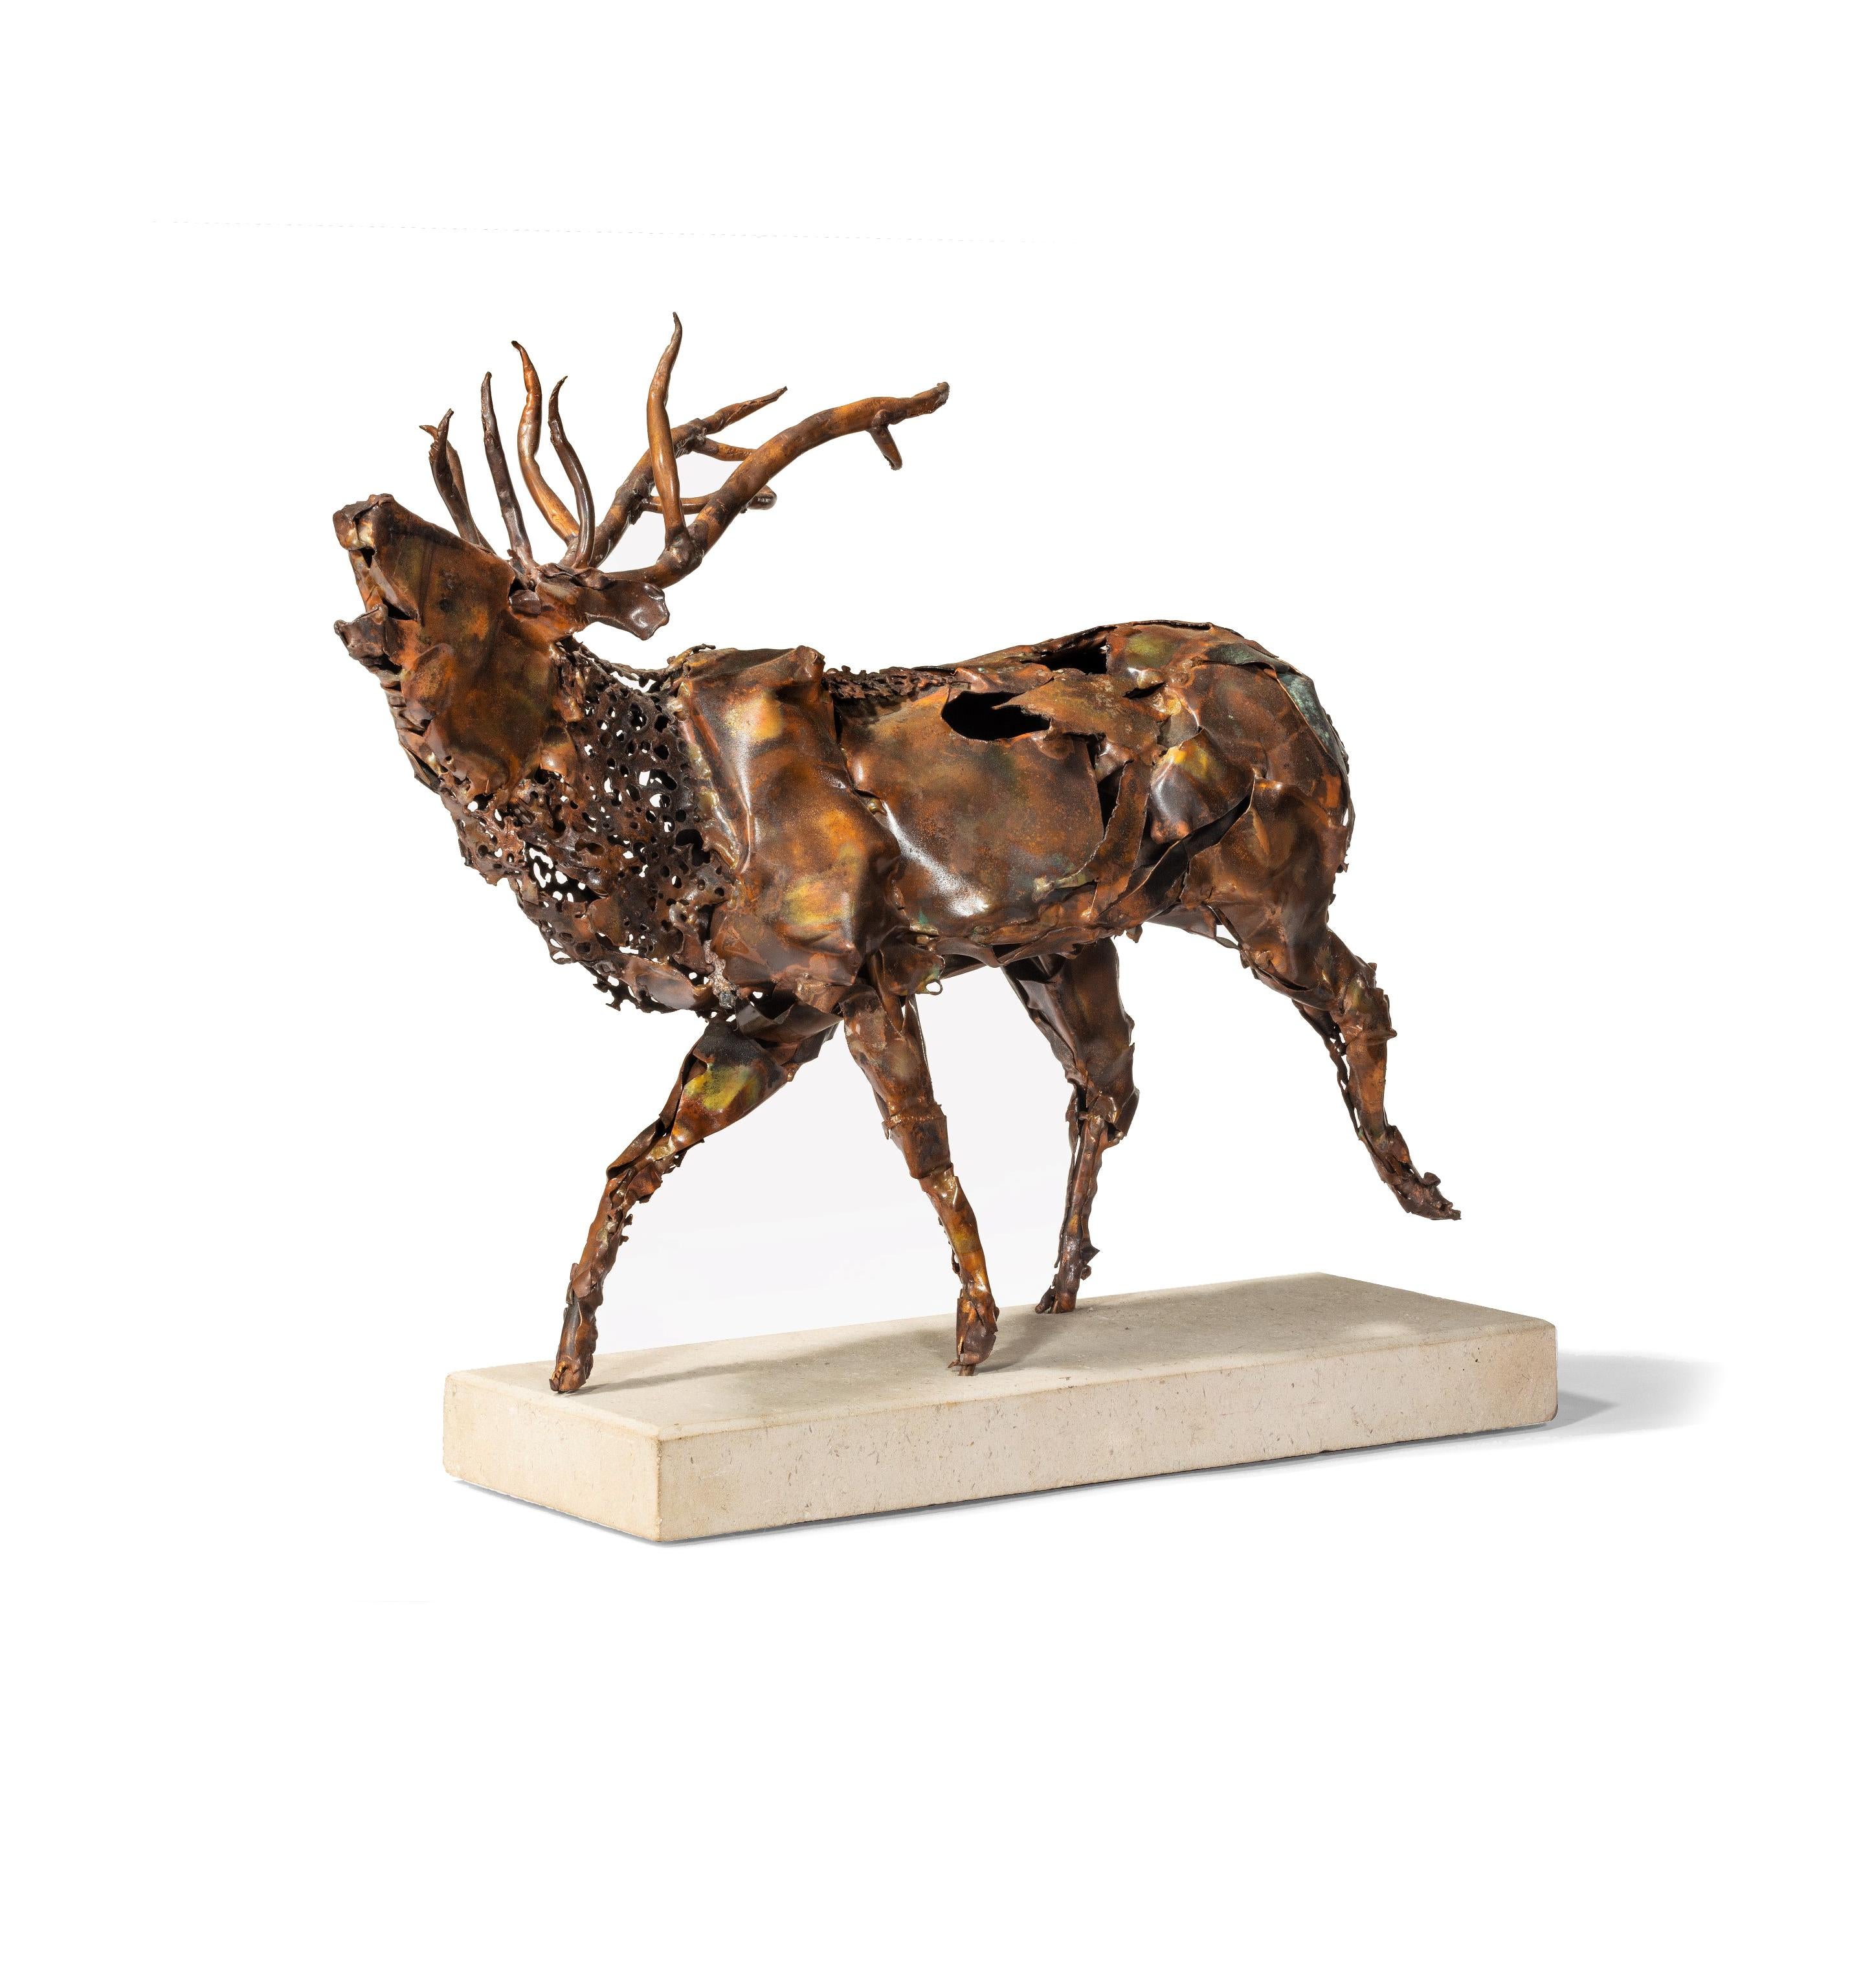 This Stag copper sculpture in a 'one off' original design set on a white limestone base, created by British artist Tony Evans. 

Tony graduated in 2003 from The Wirral Metropolitan College with a John Moores B.A. Honours Degree in Fine Art .
He was